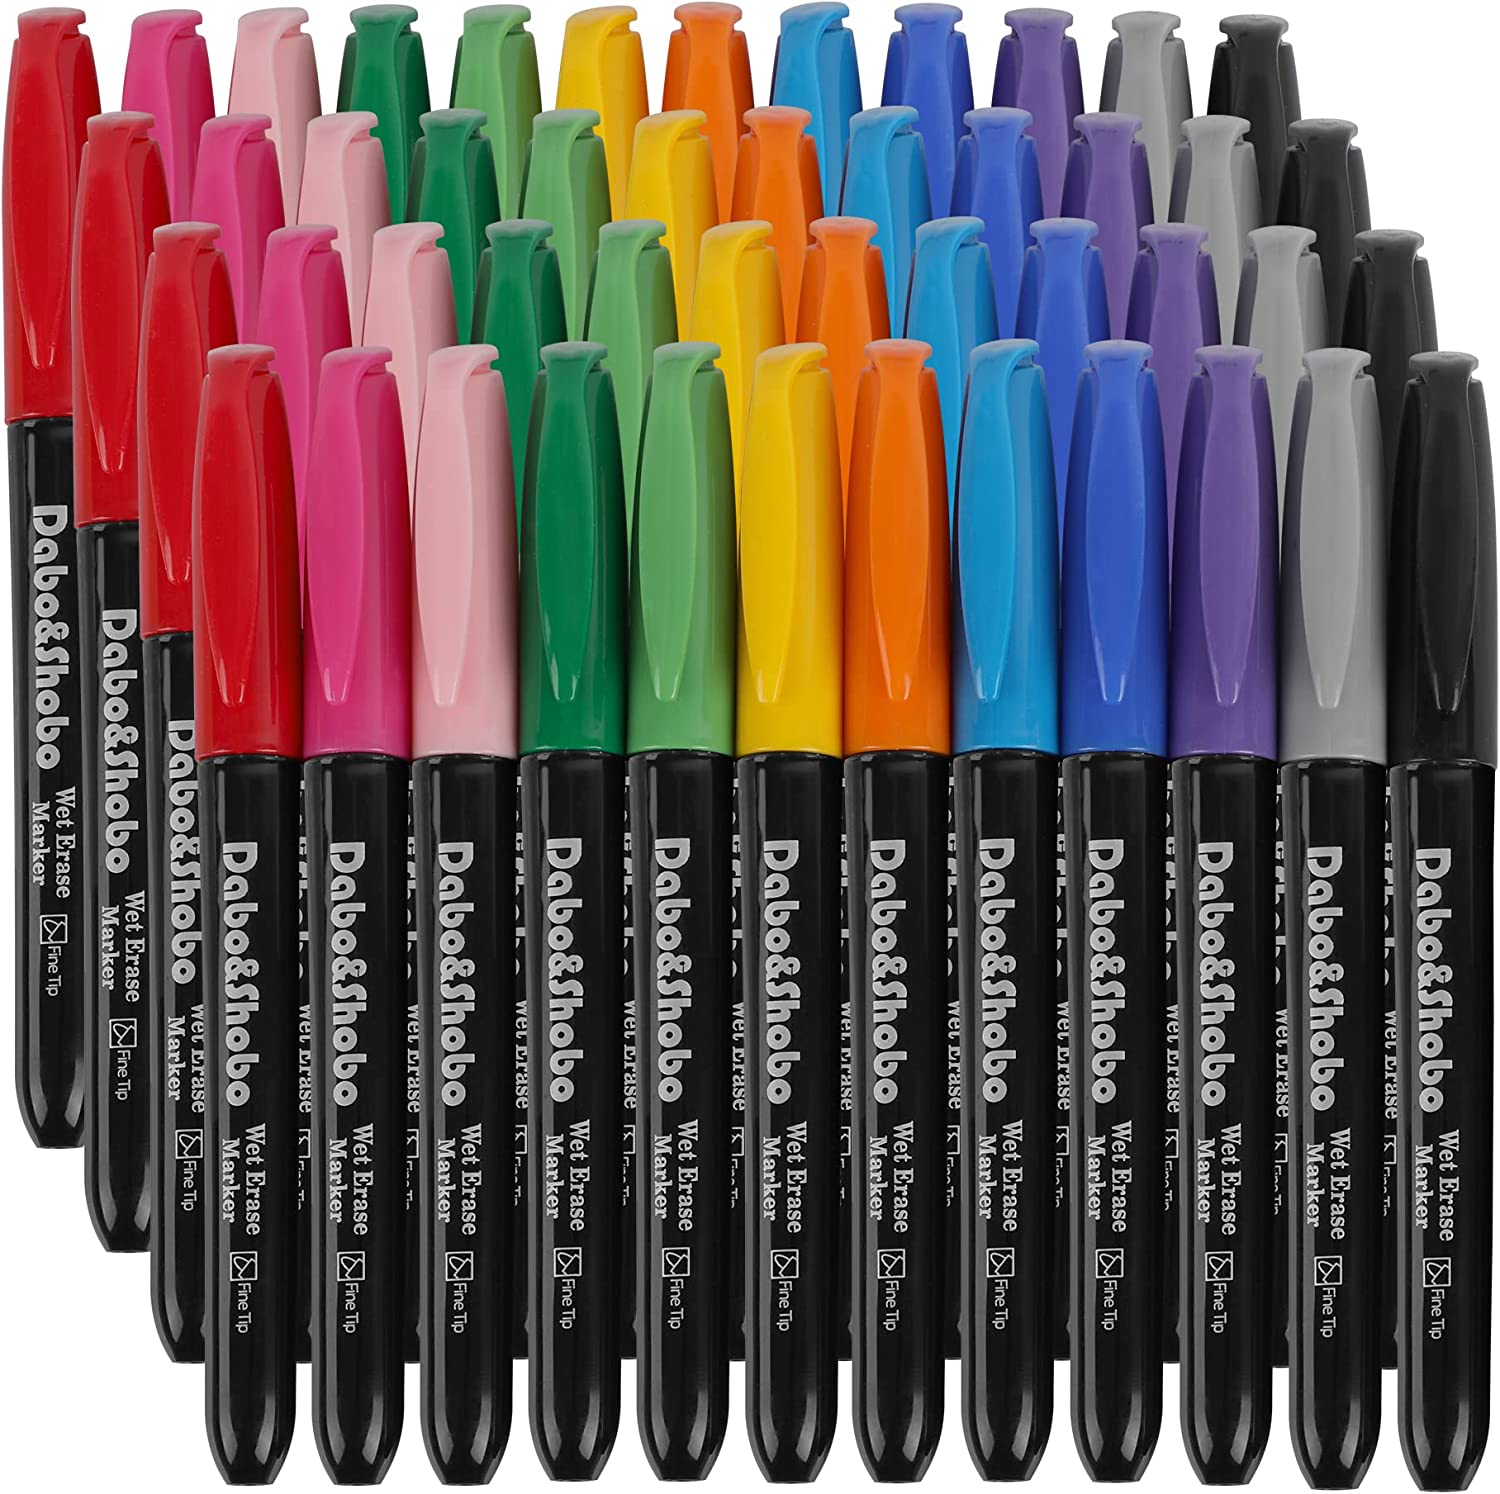  WallDeca Wet Erase Markers Fine Point, Assorted